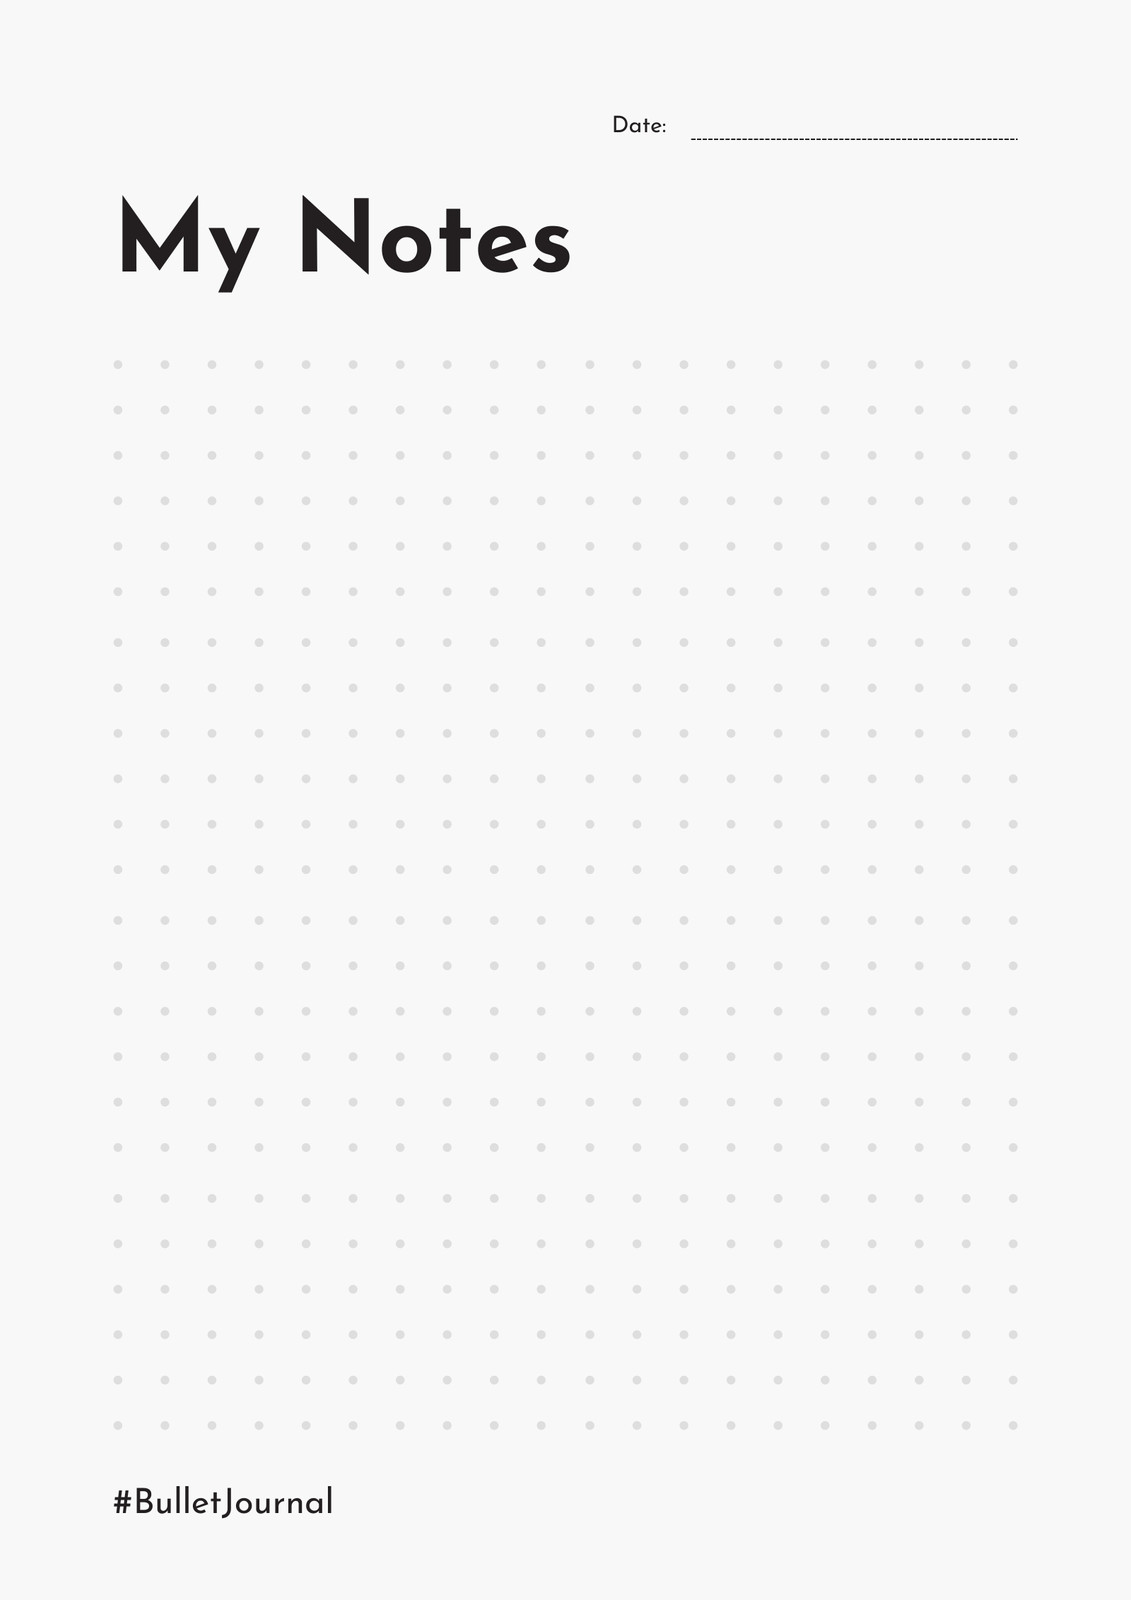 Simple A4 Memo Lined Paper - Templates by Canva